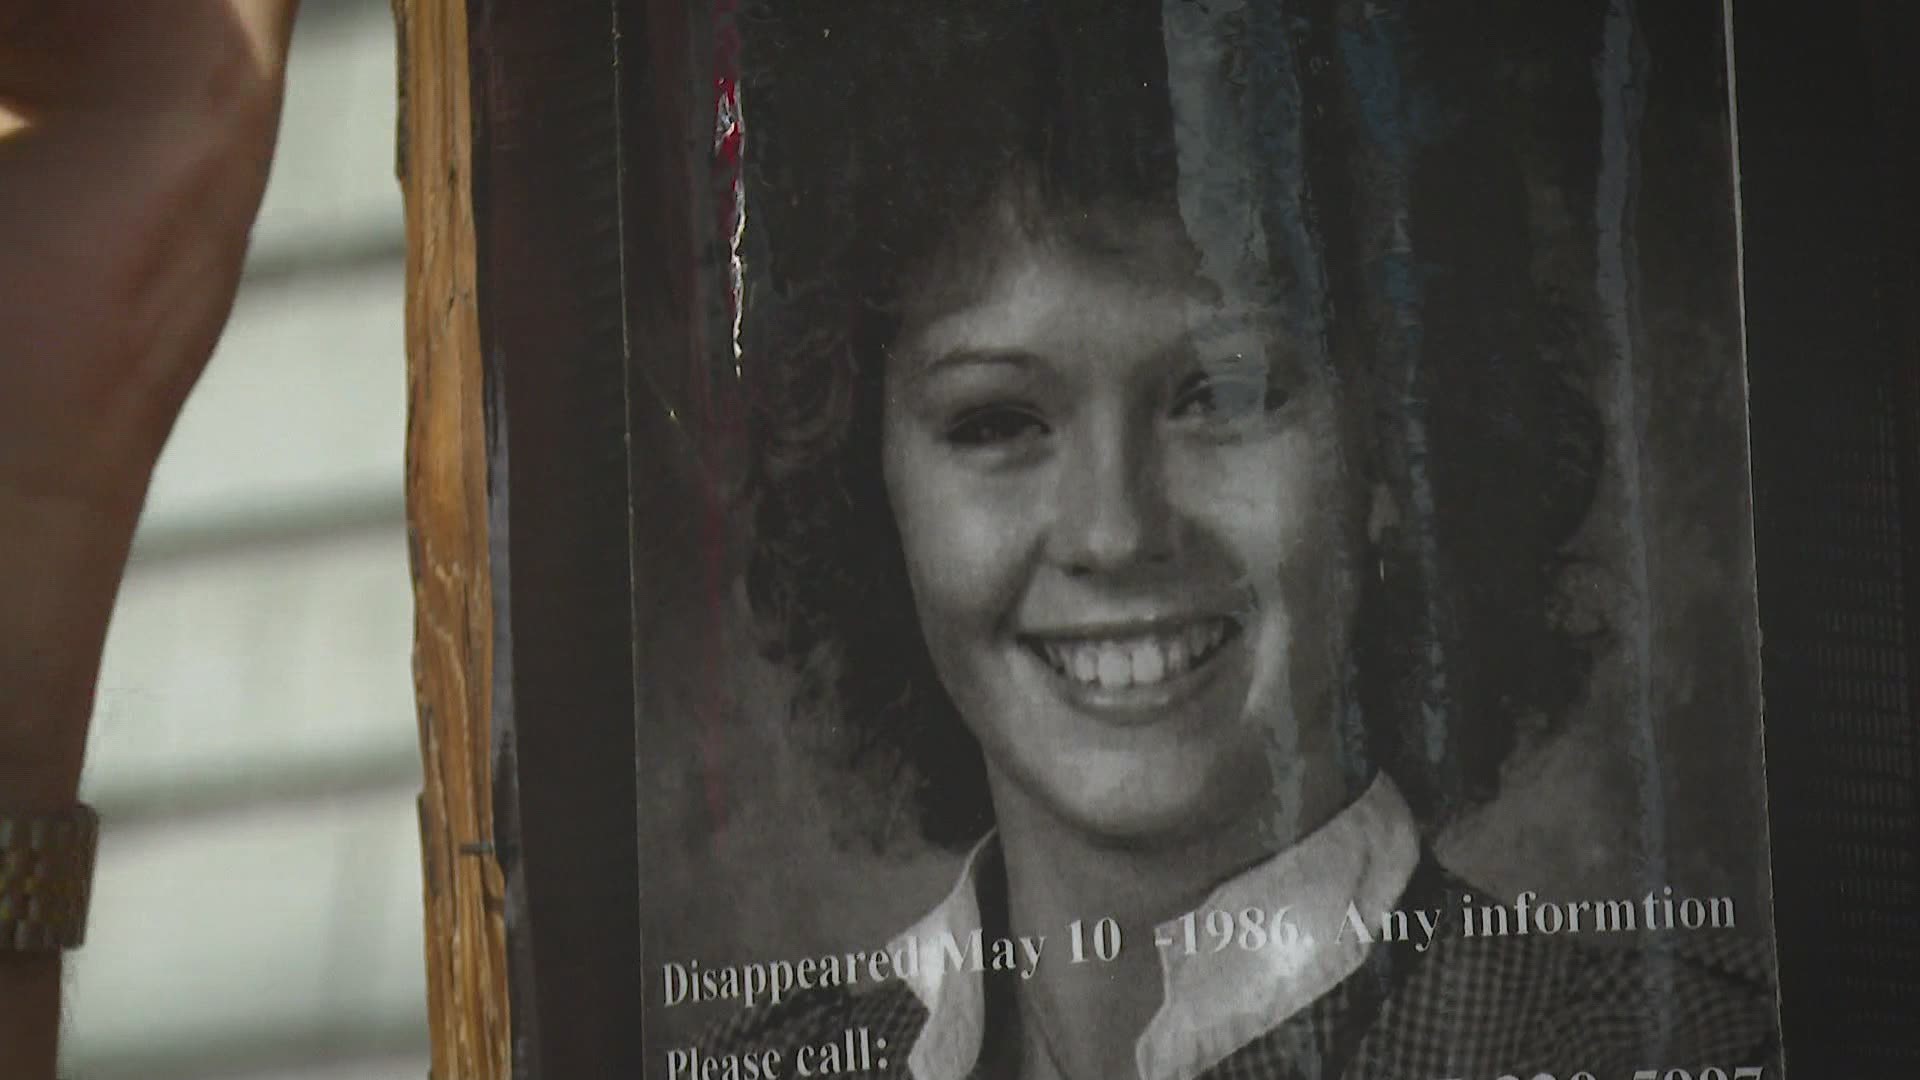 Kimberly Moreau went missing in 1986, last seen on the night of her junior prom. Kim's father, Richard, has been putting up posters of her every year since.